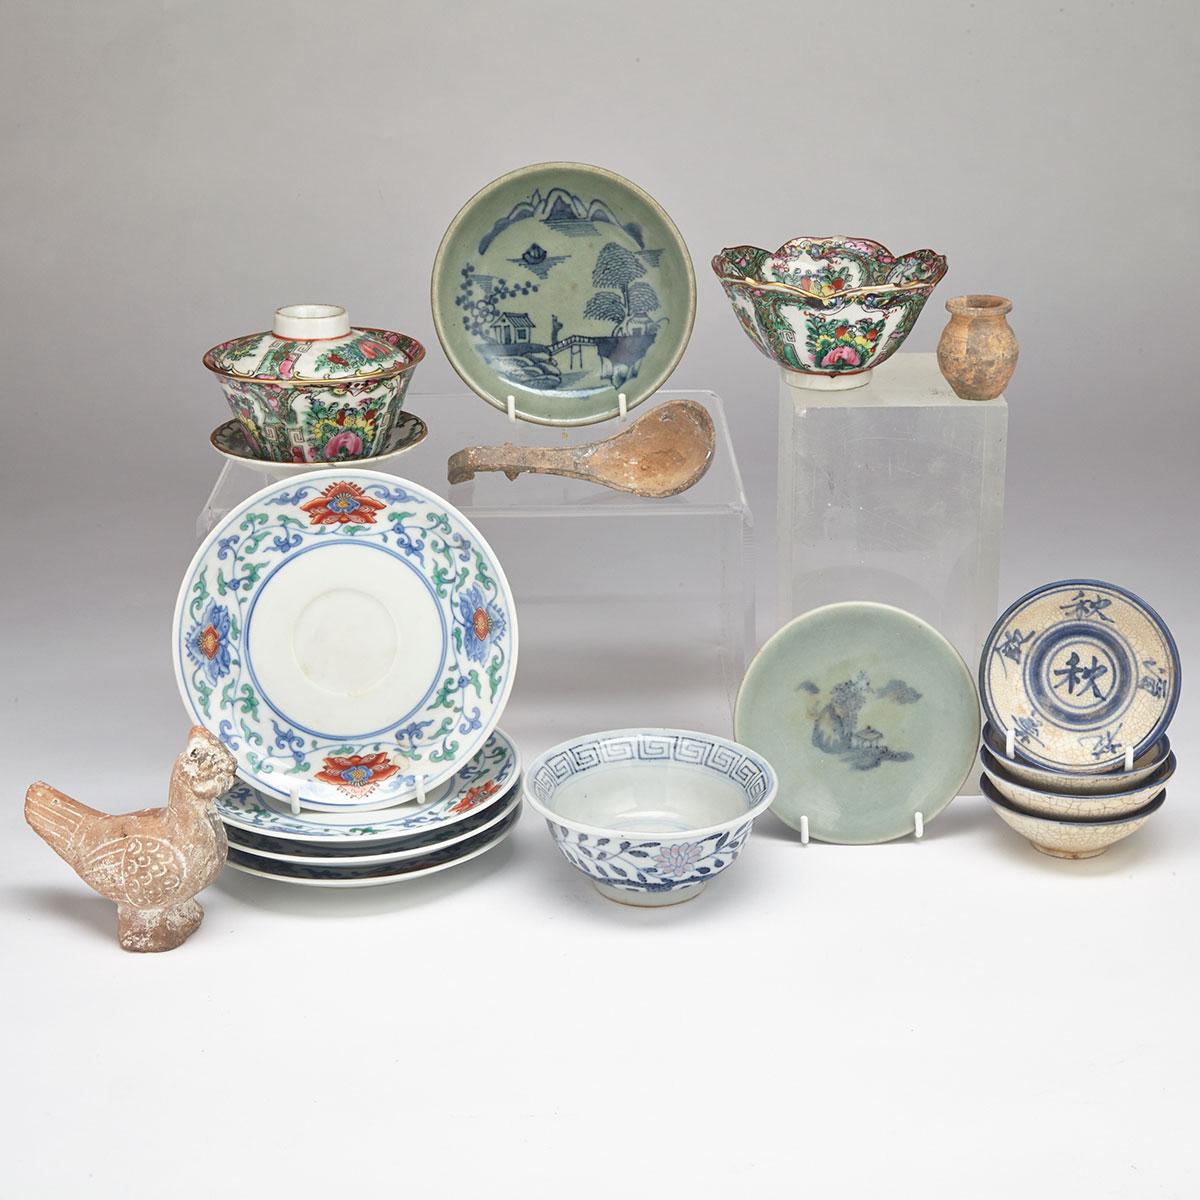 Group of Assorted Chinese Porcelain and Ceramic Items, 19th/20th Century